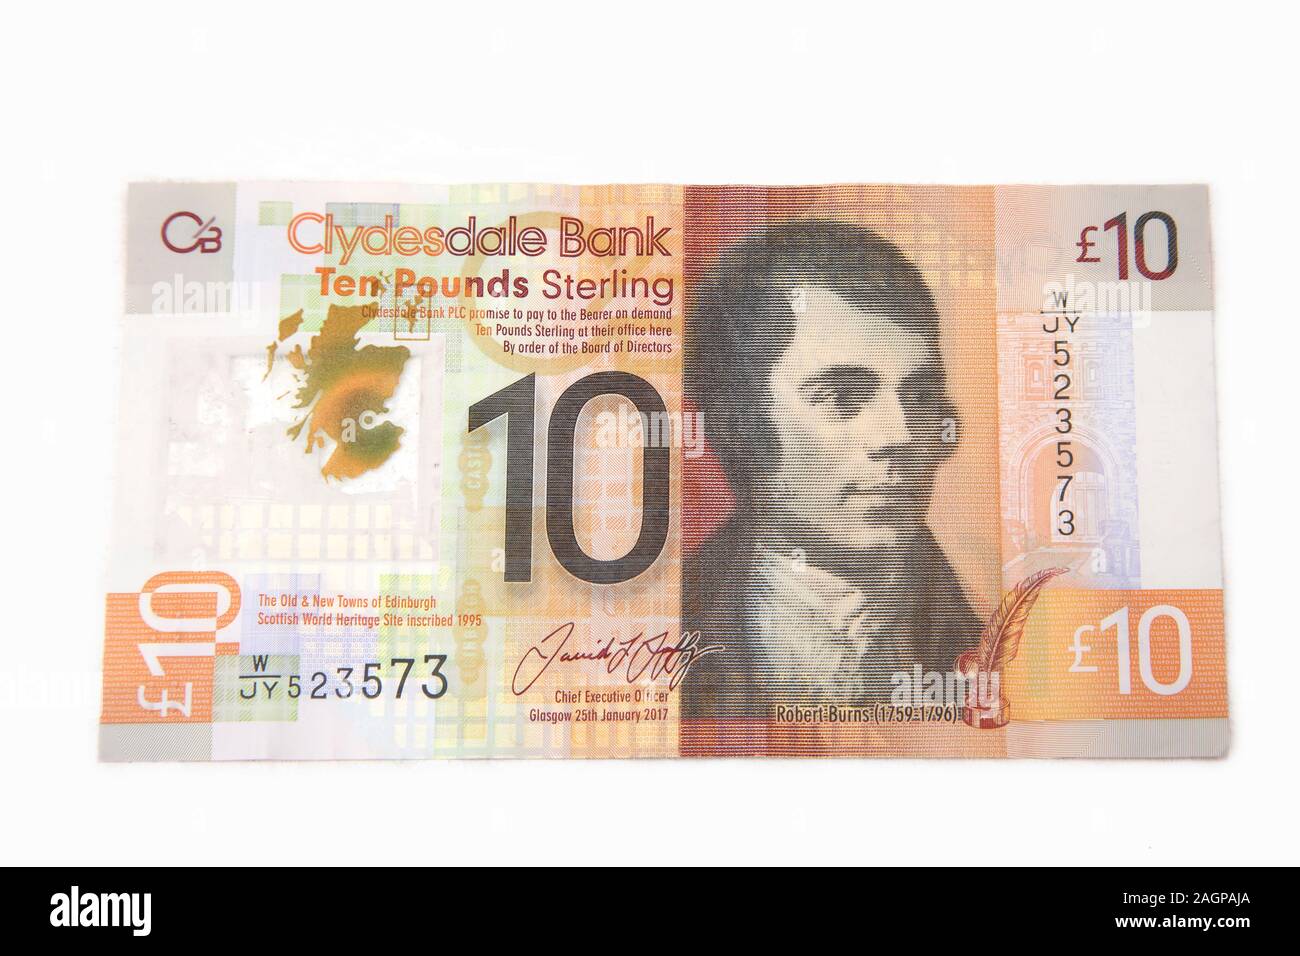 Robert Burns sulle facce di Clydesdale Bank dieci Pound nota Foto Stock